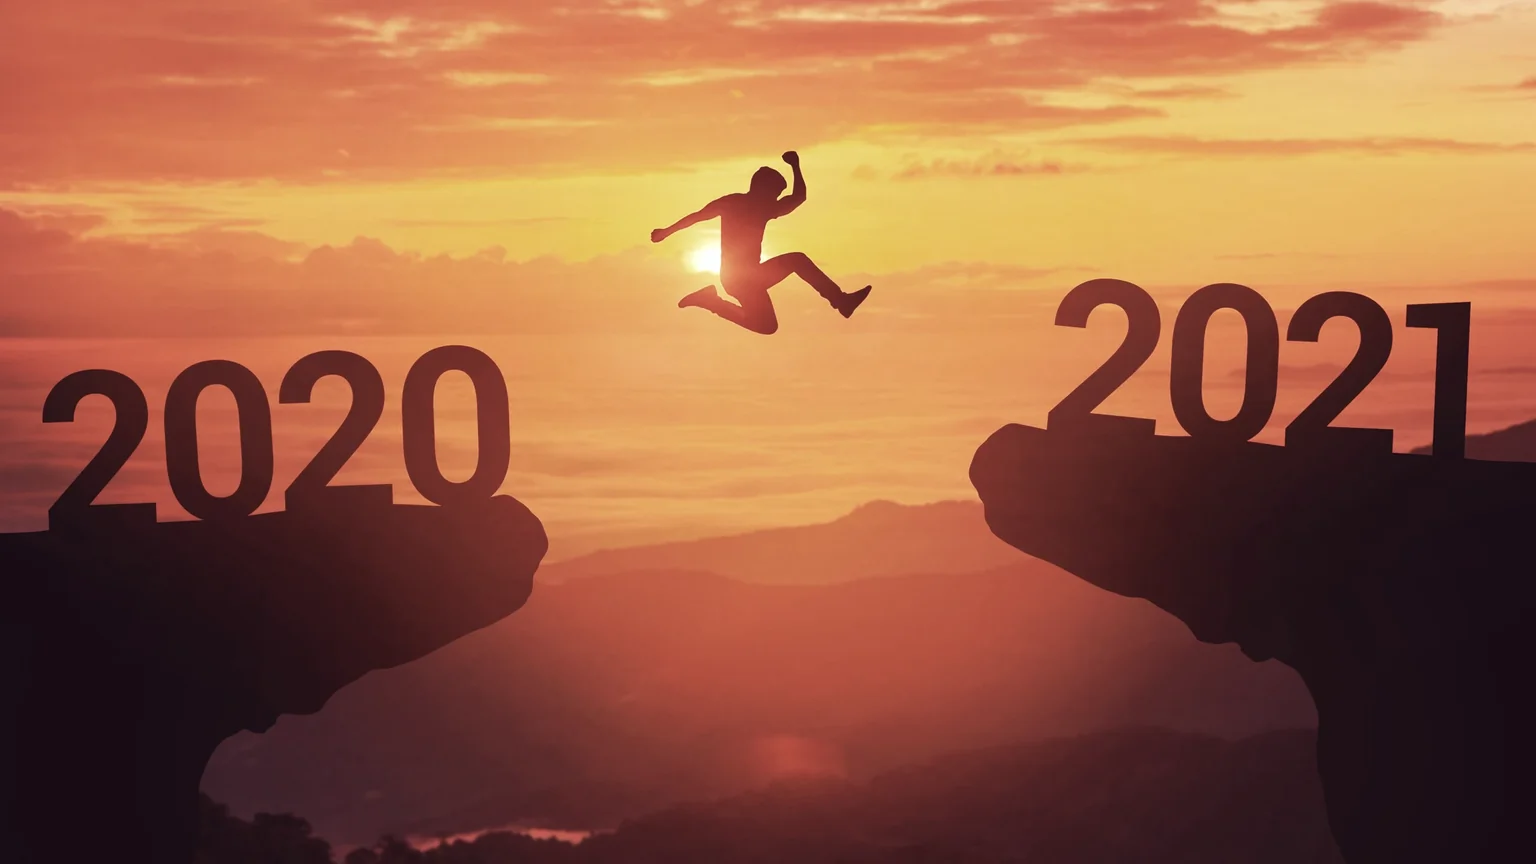 Chainlink shows no signs of slowing down in 2021. Image: Shutterstock